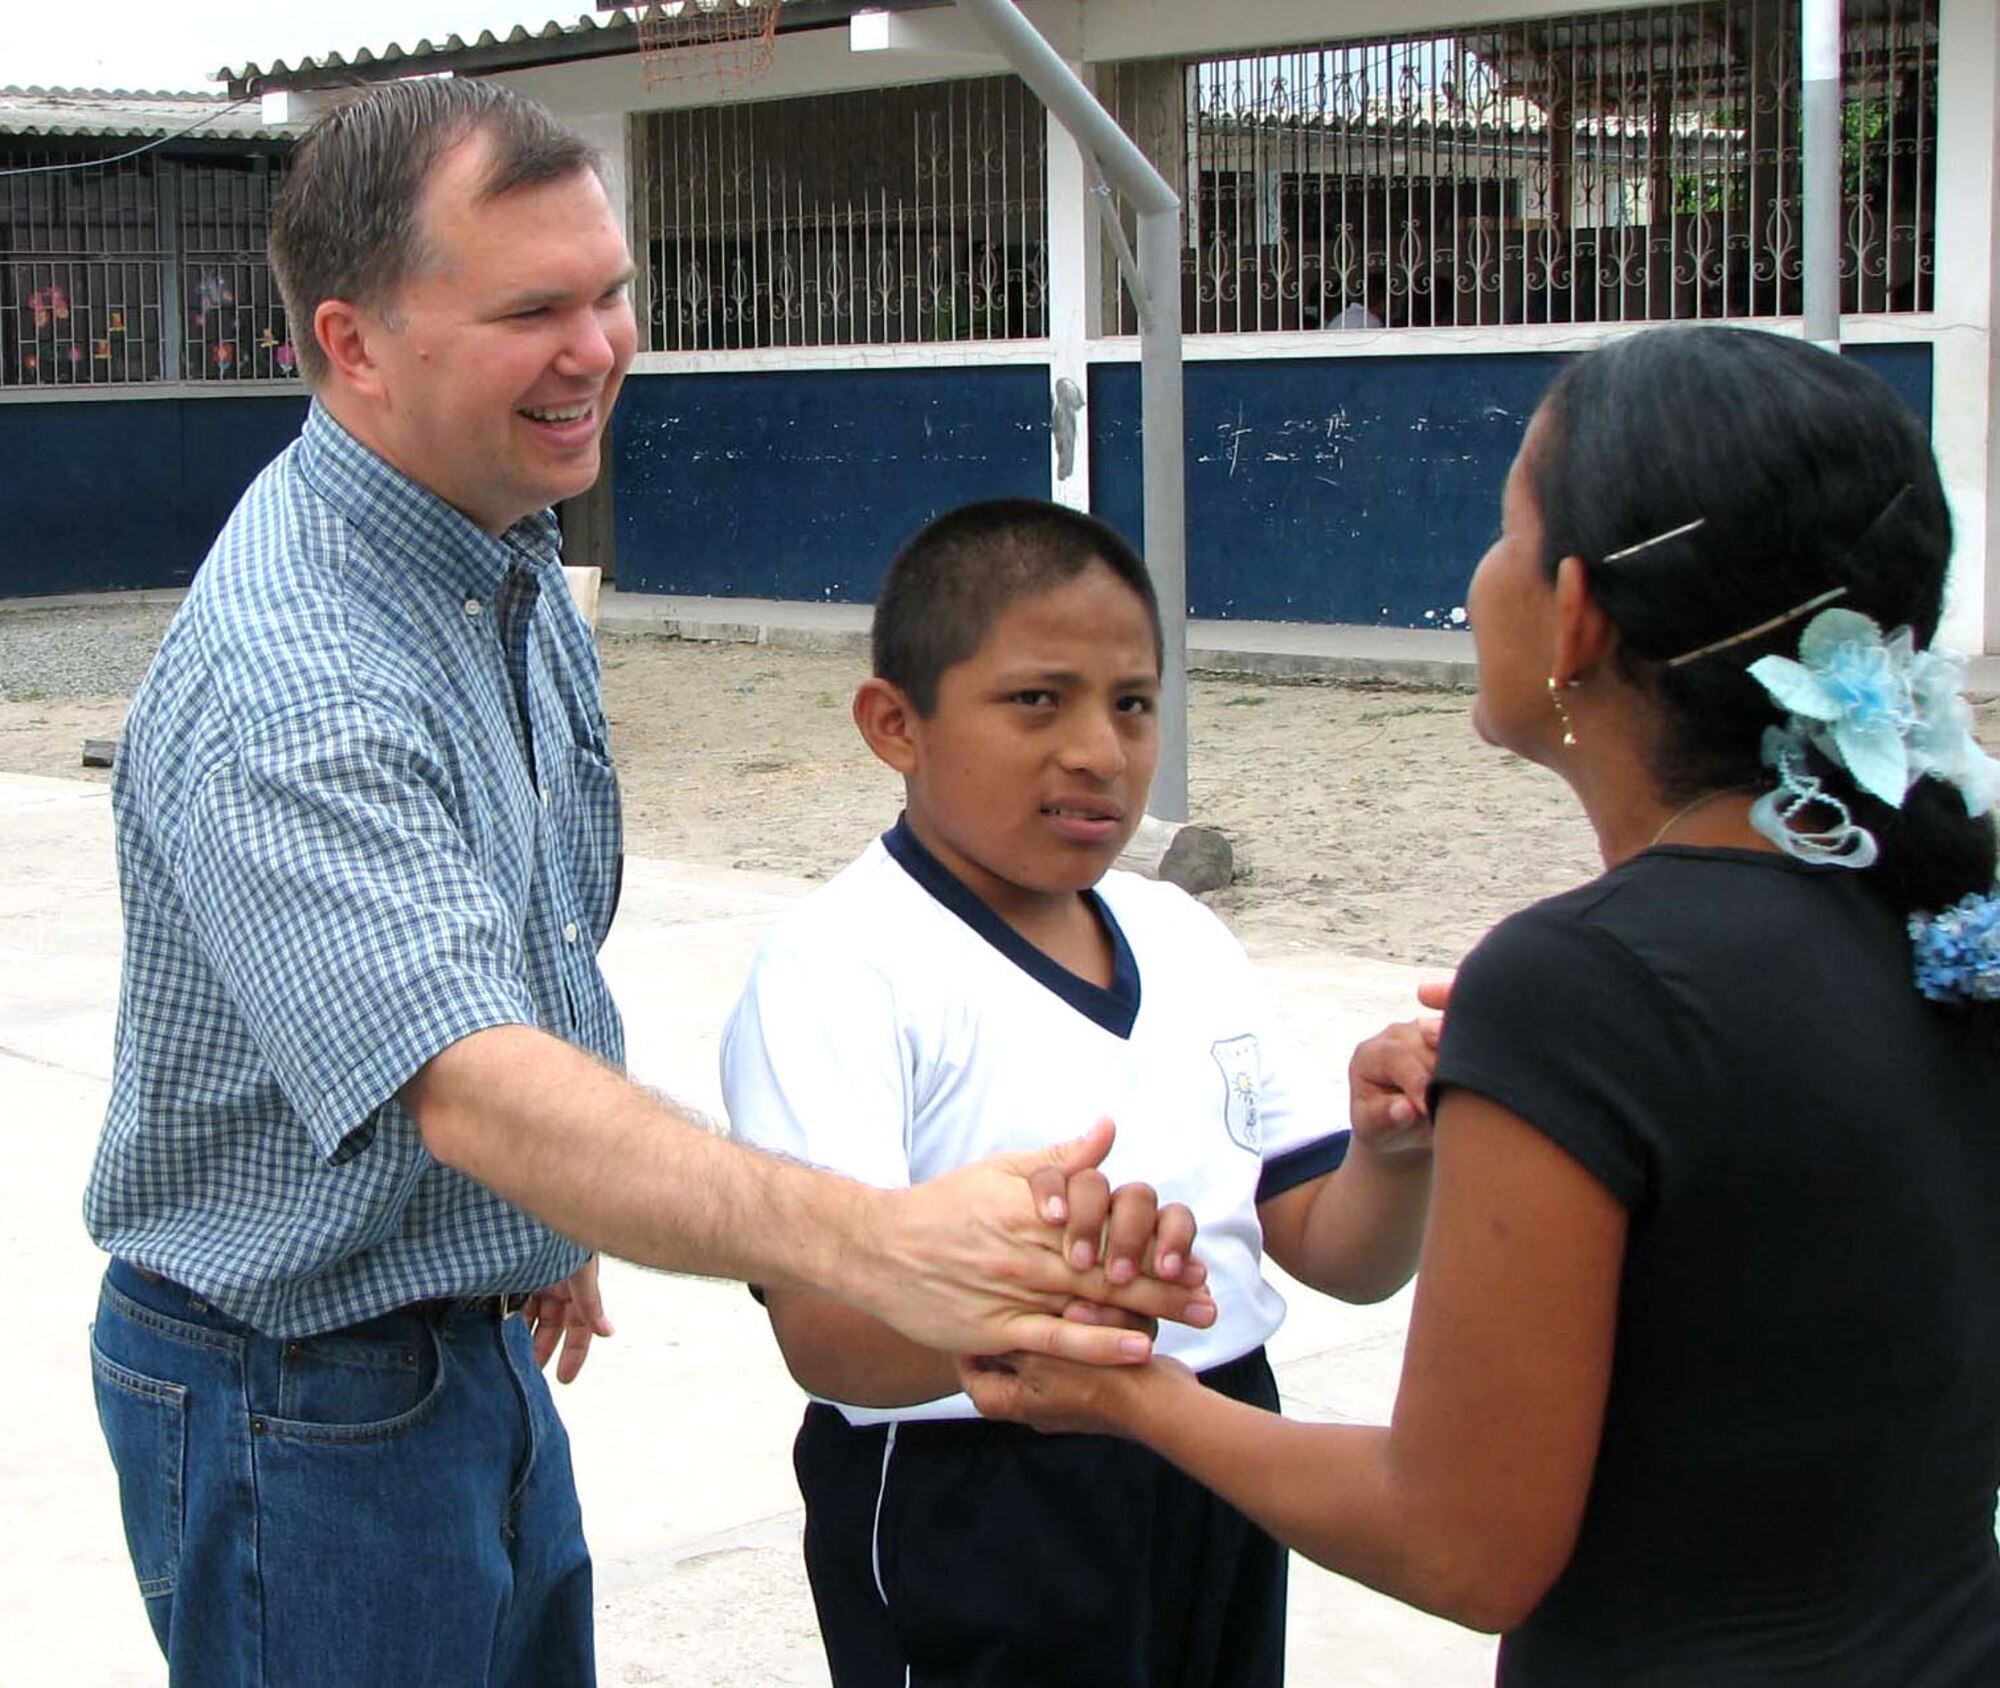 Chaplain (Capt.) Jeff Granger volunteers at the Angelica Flores School for the Handicapped in Manta, Ecuador. The chaplain, assigned to Manta Forward Operating Location, provides community relations in Manta and surrounding areas as part of his duties. (Courtesy photo)